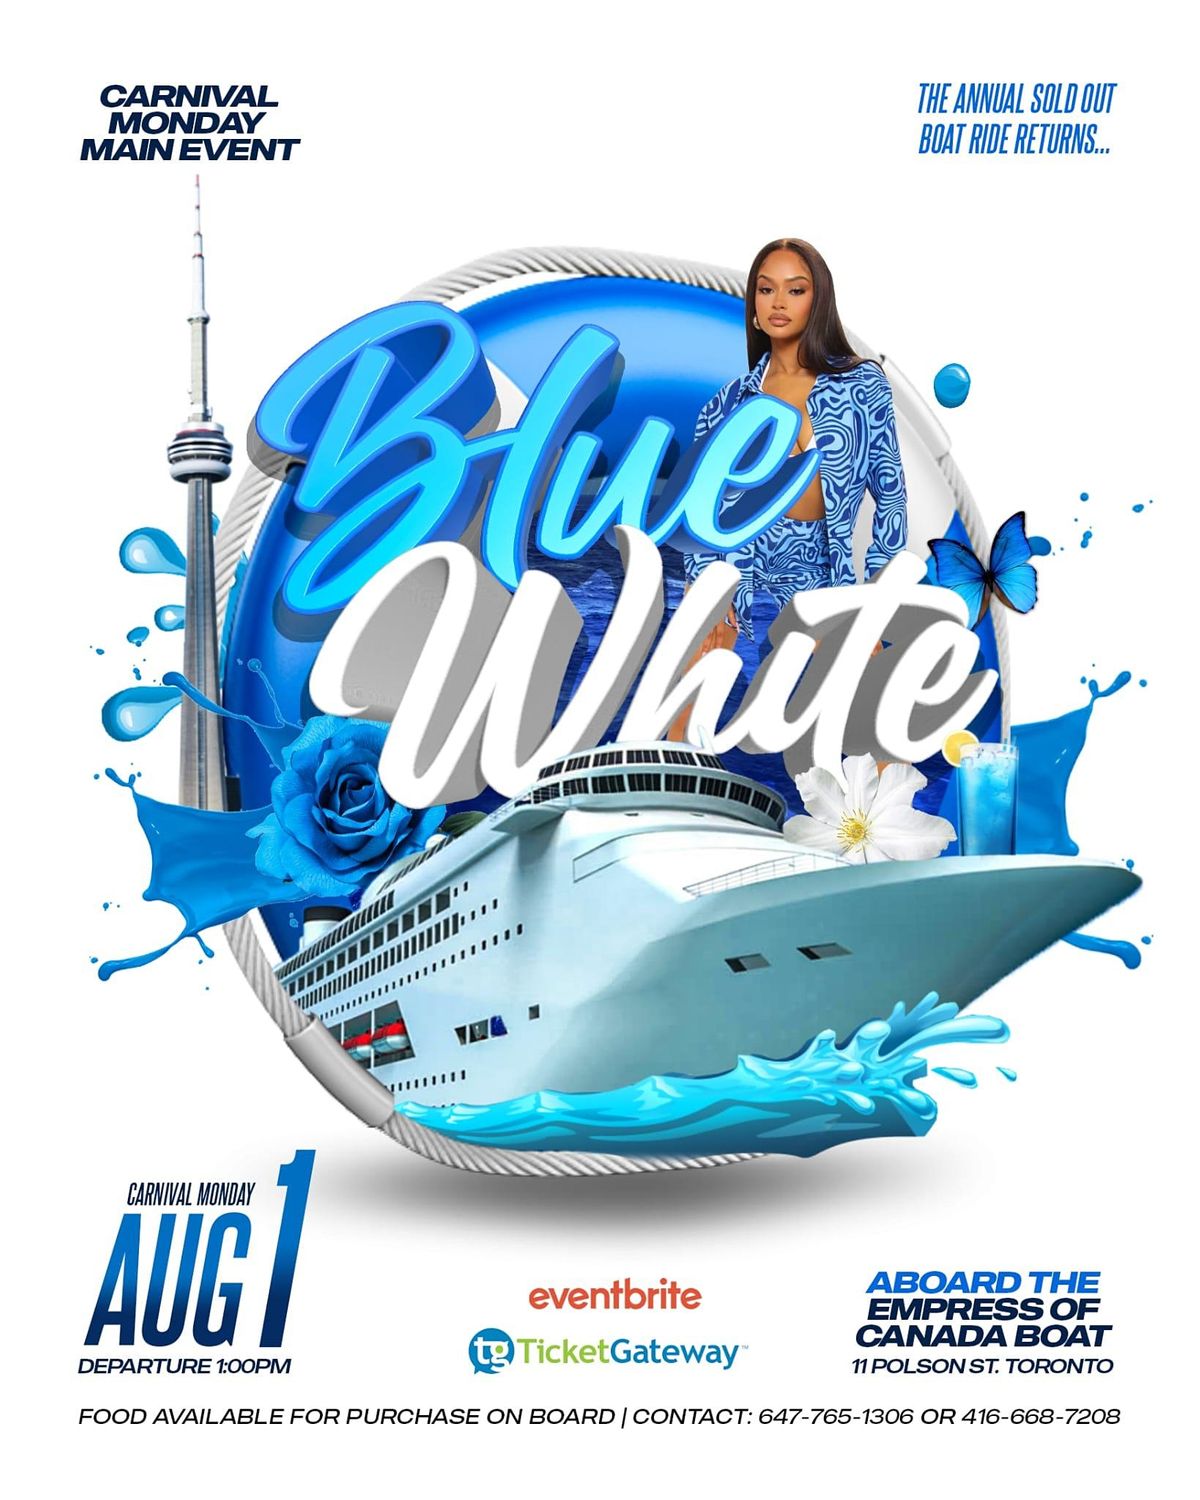 Caribana's Annual Blue and White Boat Ride